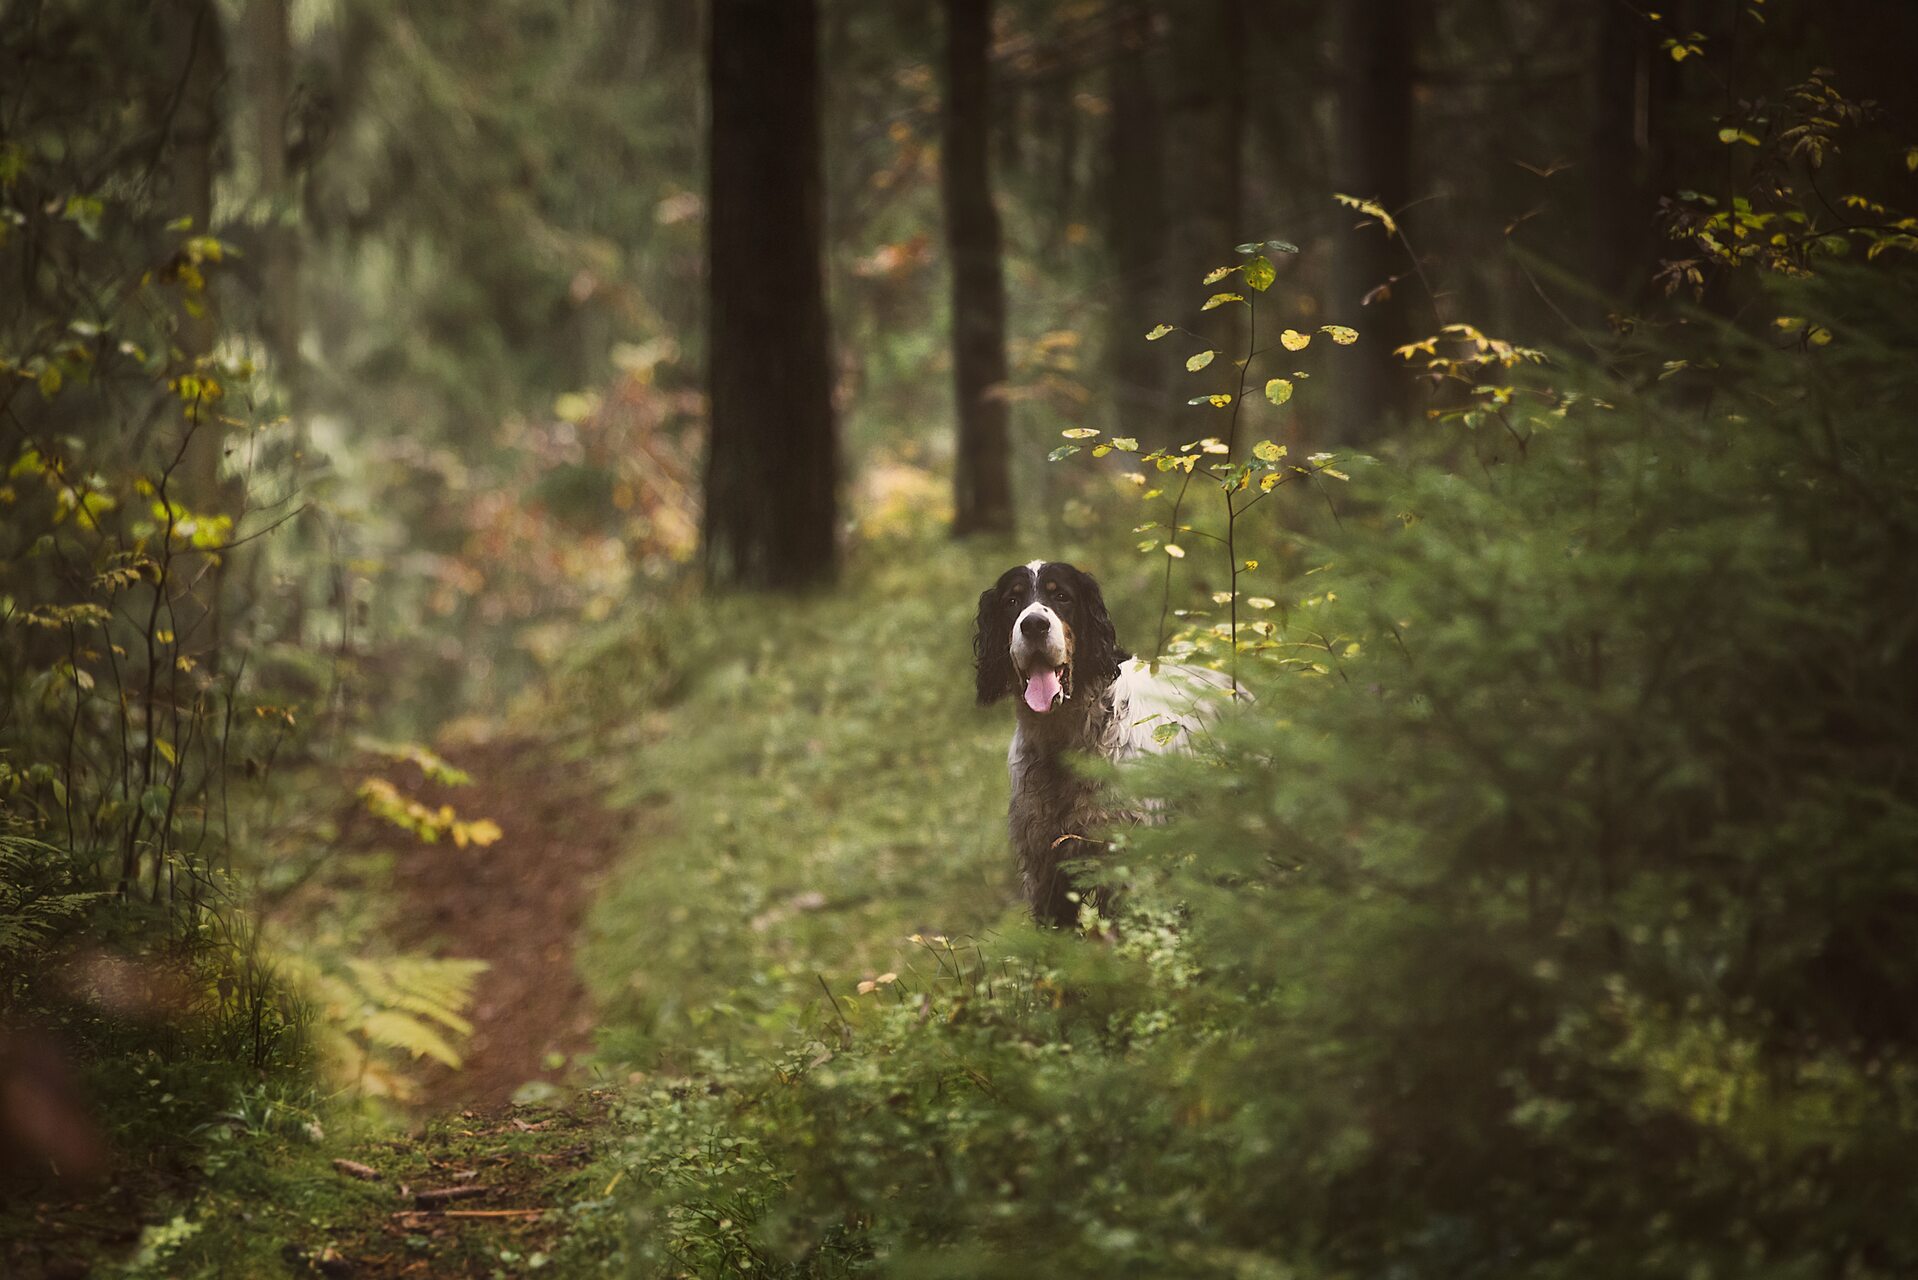 A dog exploring a forest path